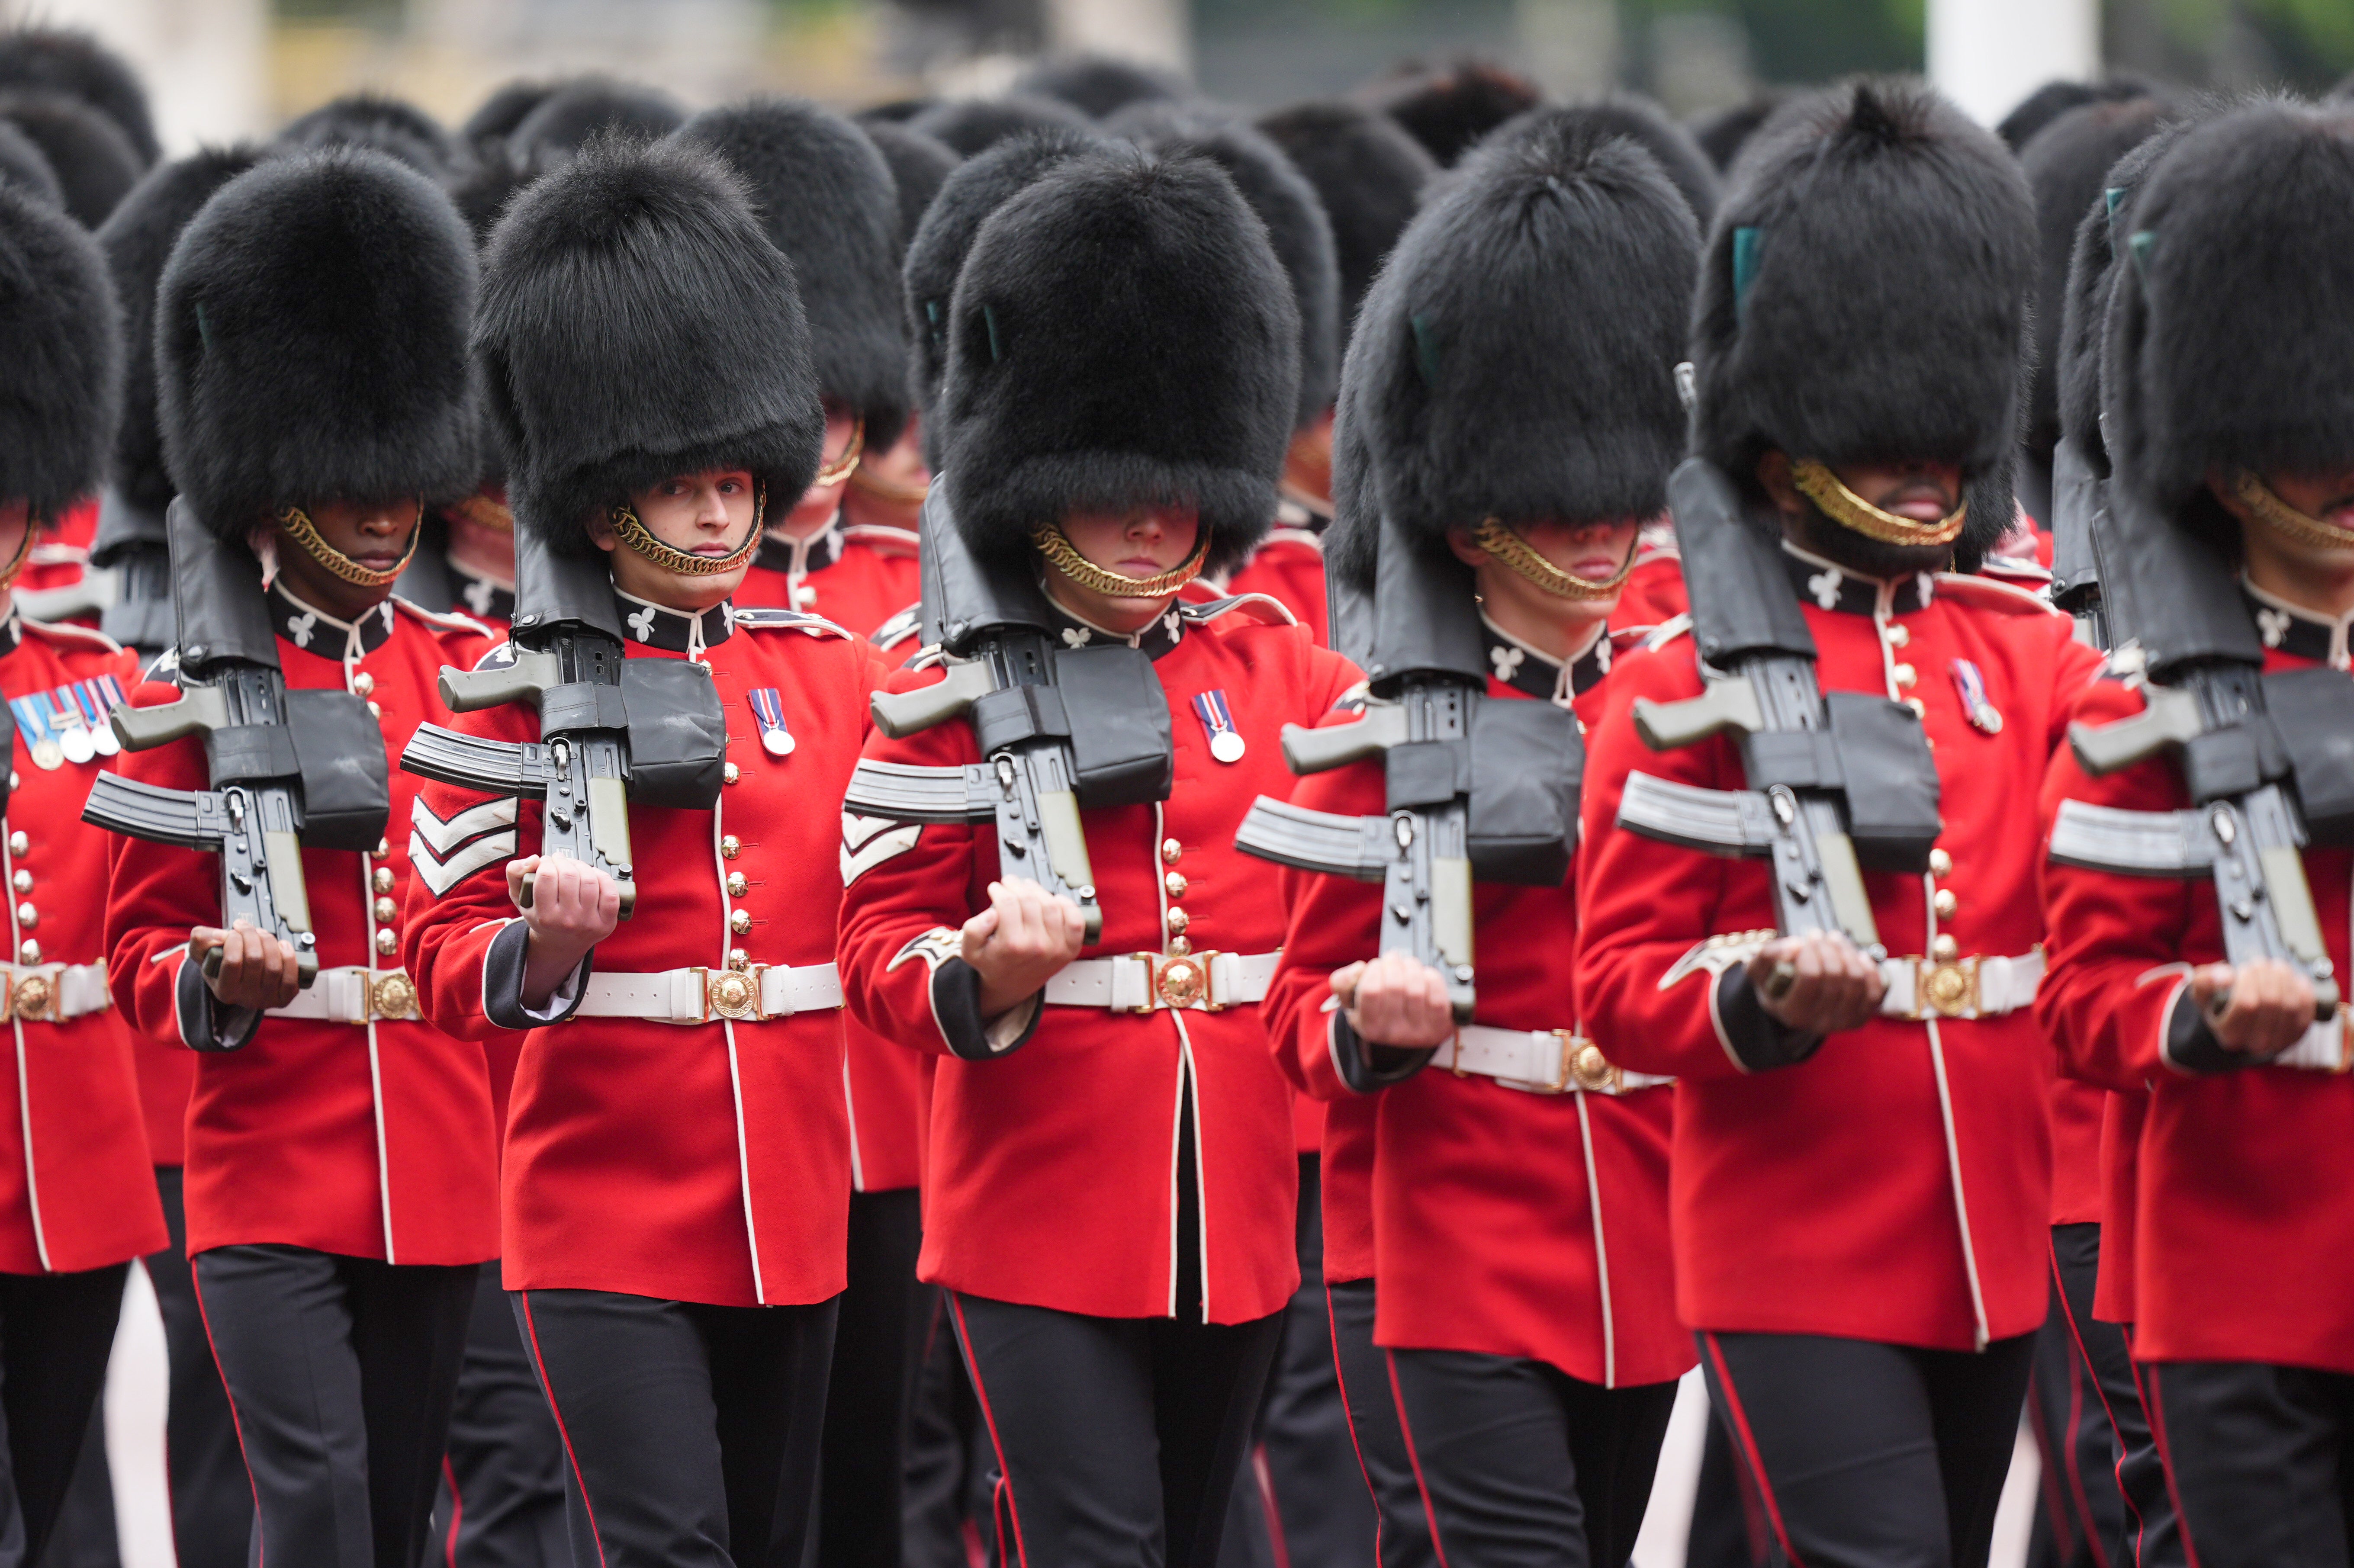 Members of the Irish Guards take part in the procession